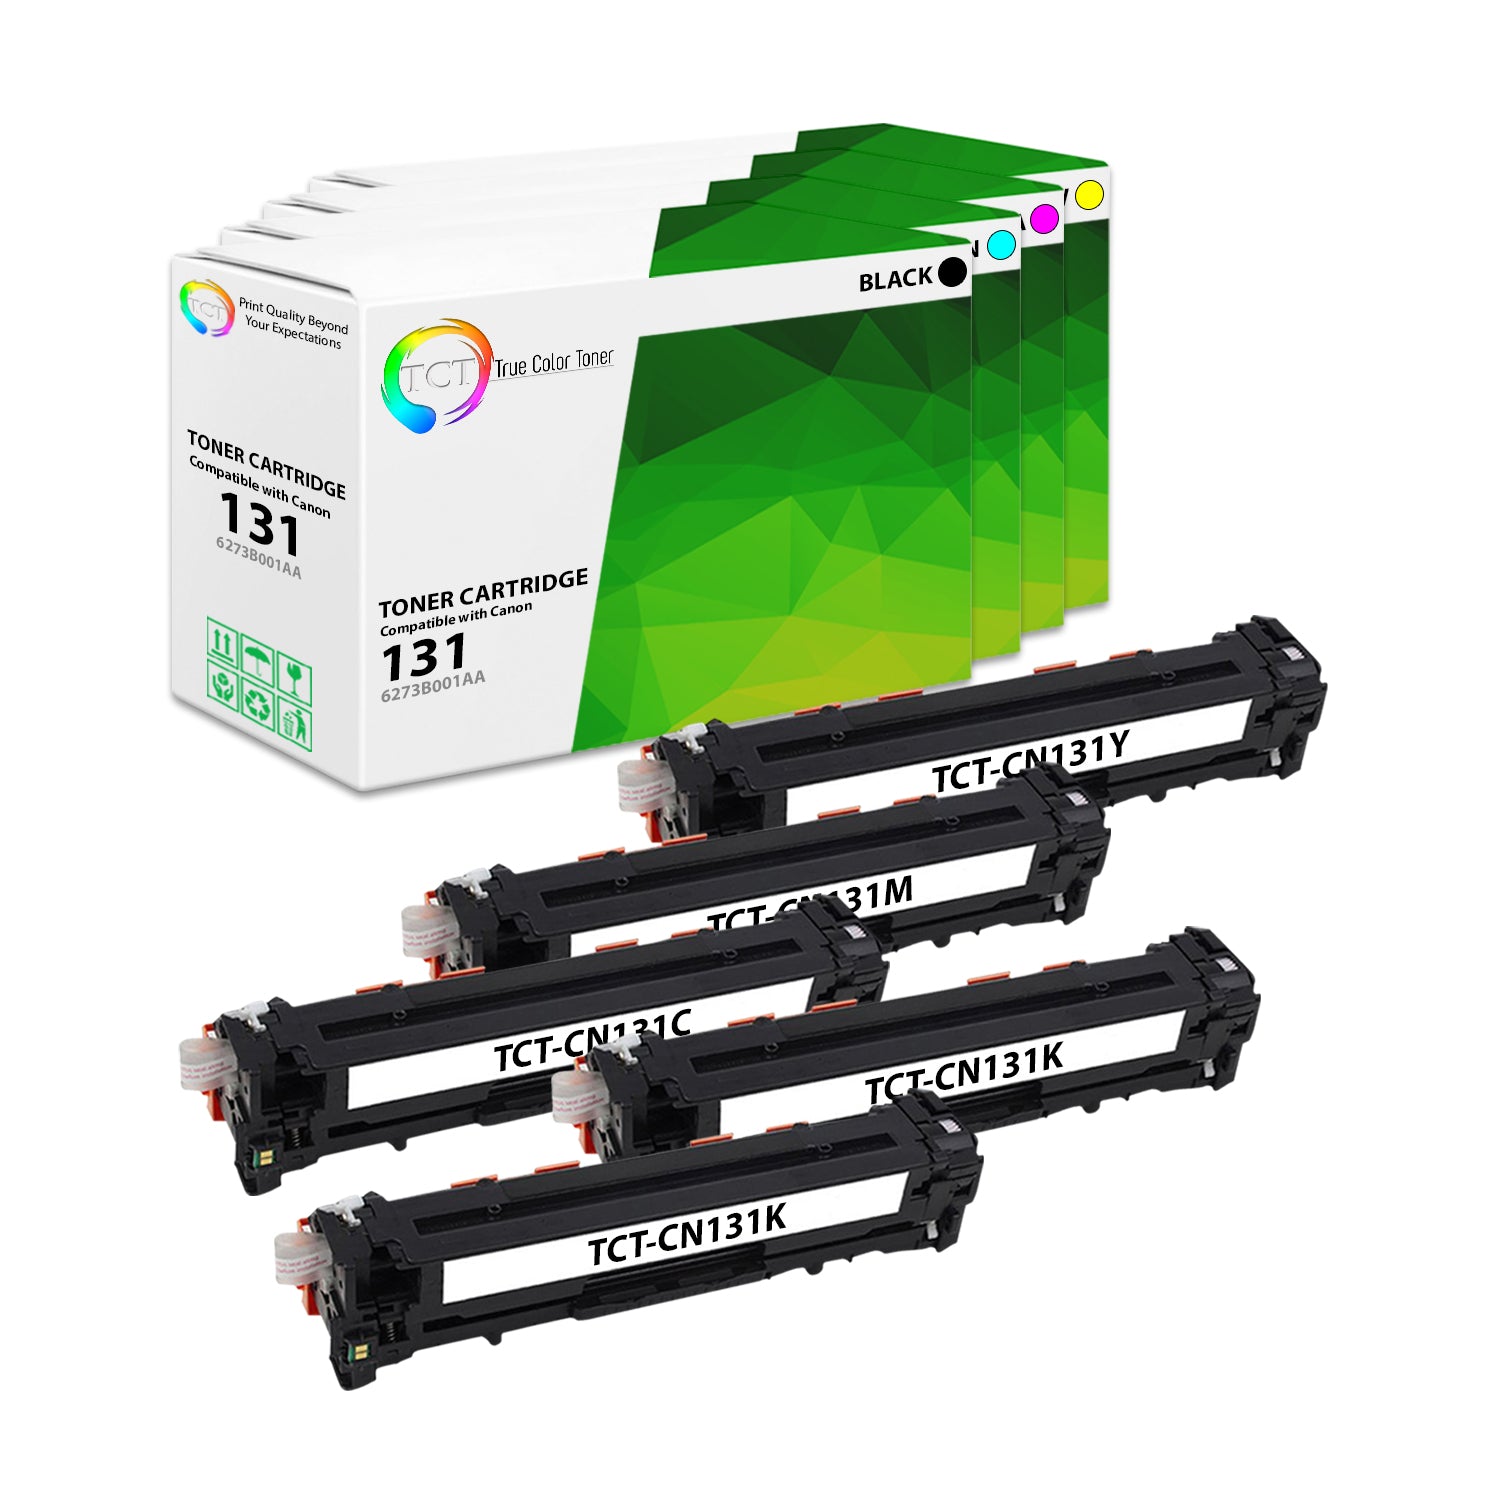 TCT Compatible Toner Cartridge Replacement for the Canon 131 Series - 5 Pack (BK, C, M, Y)